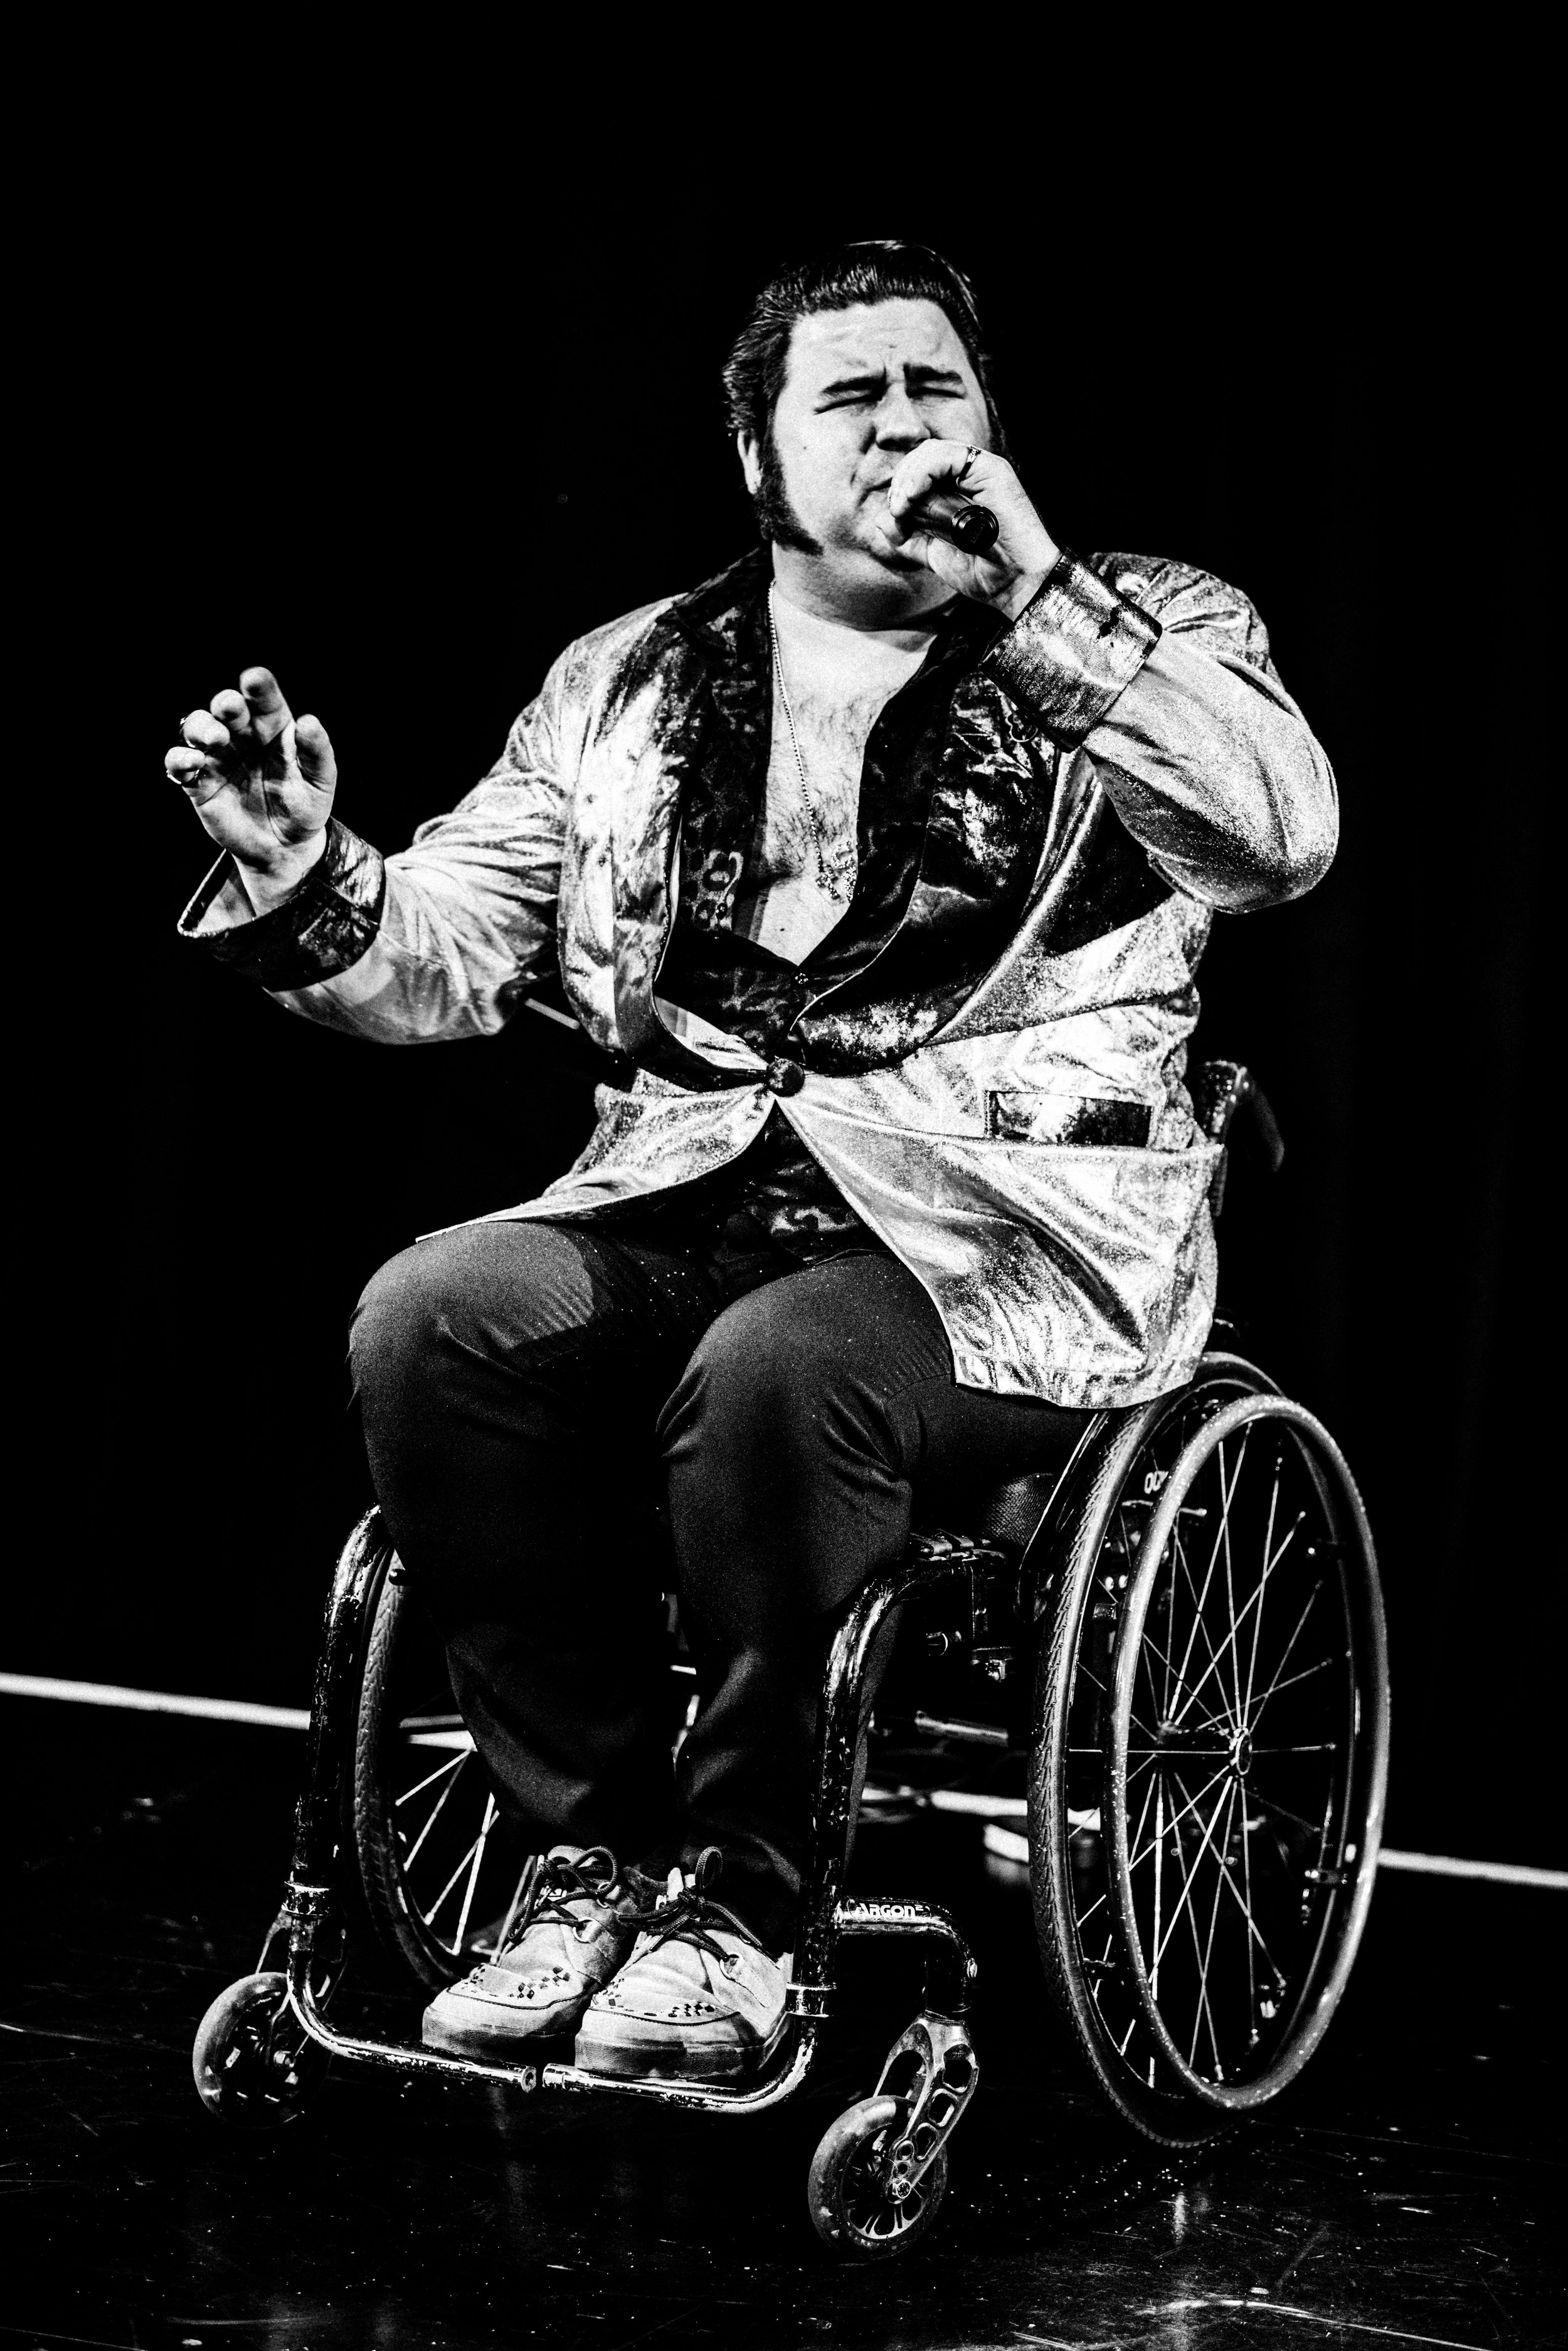 The picture is in black and white. The performer is dressed up to look like Elvis. He sings into a microphone, clearly giving his all. The performer is a wheelchair user.